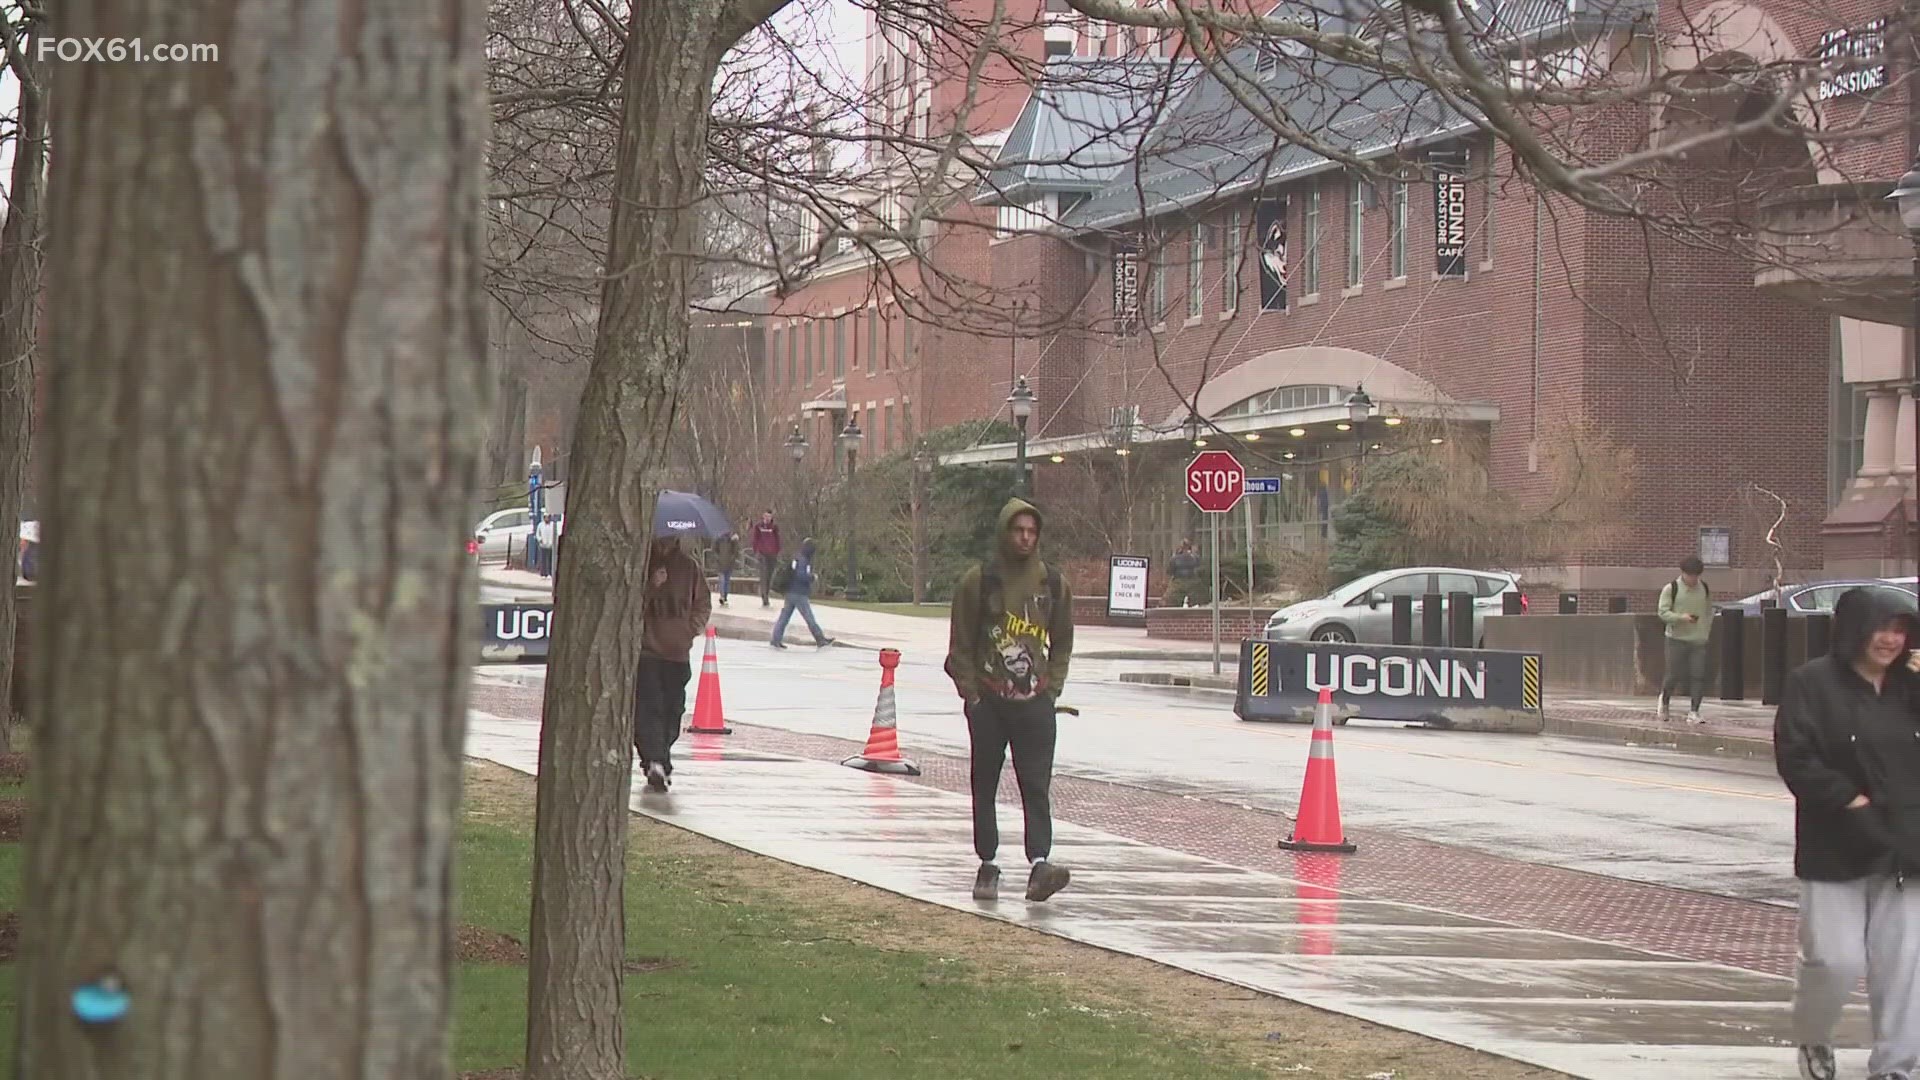 UConn is one of just six universities chosen to receive the funding. School staff said they're excited to hit the ground running with a new cybersecurity center.